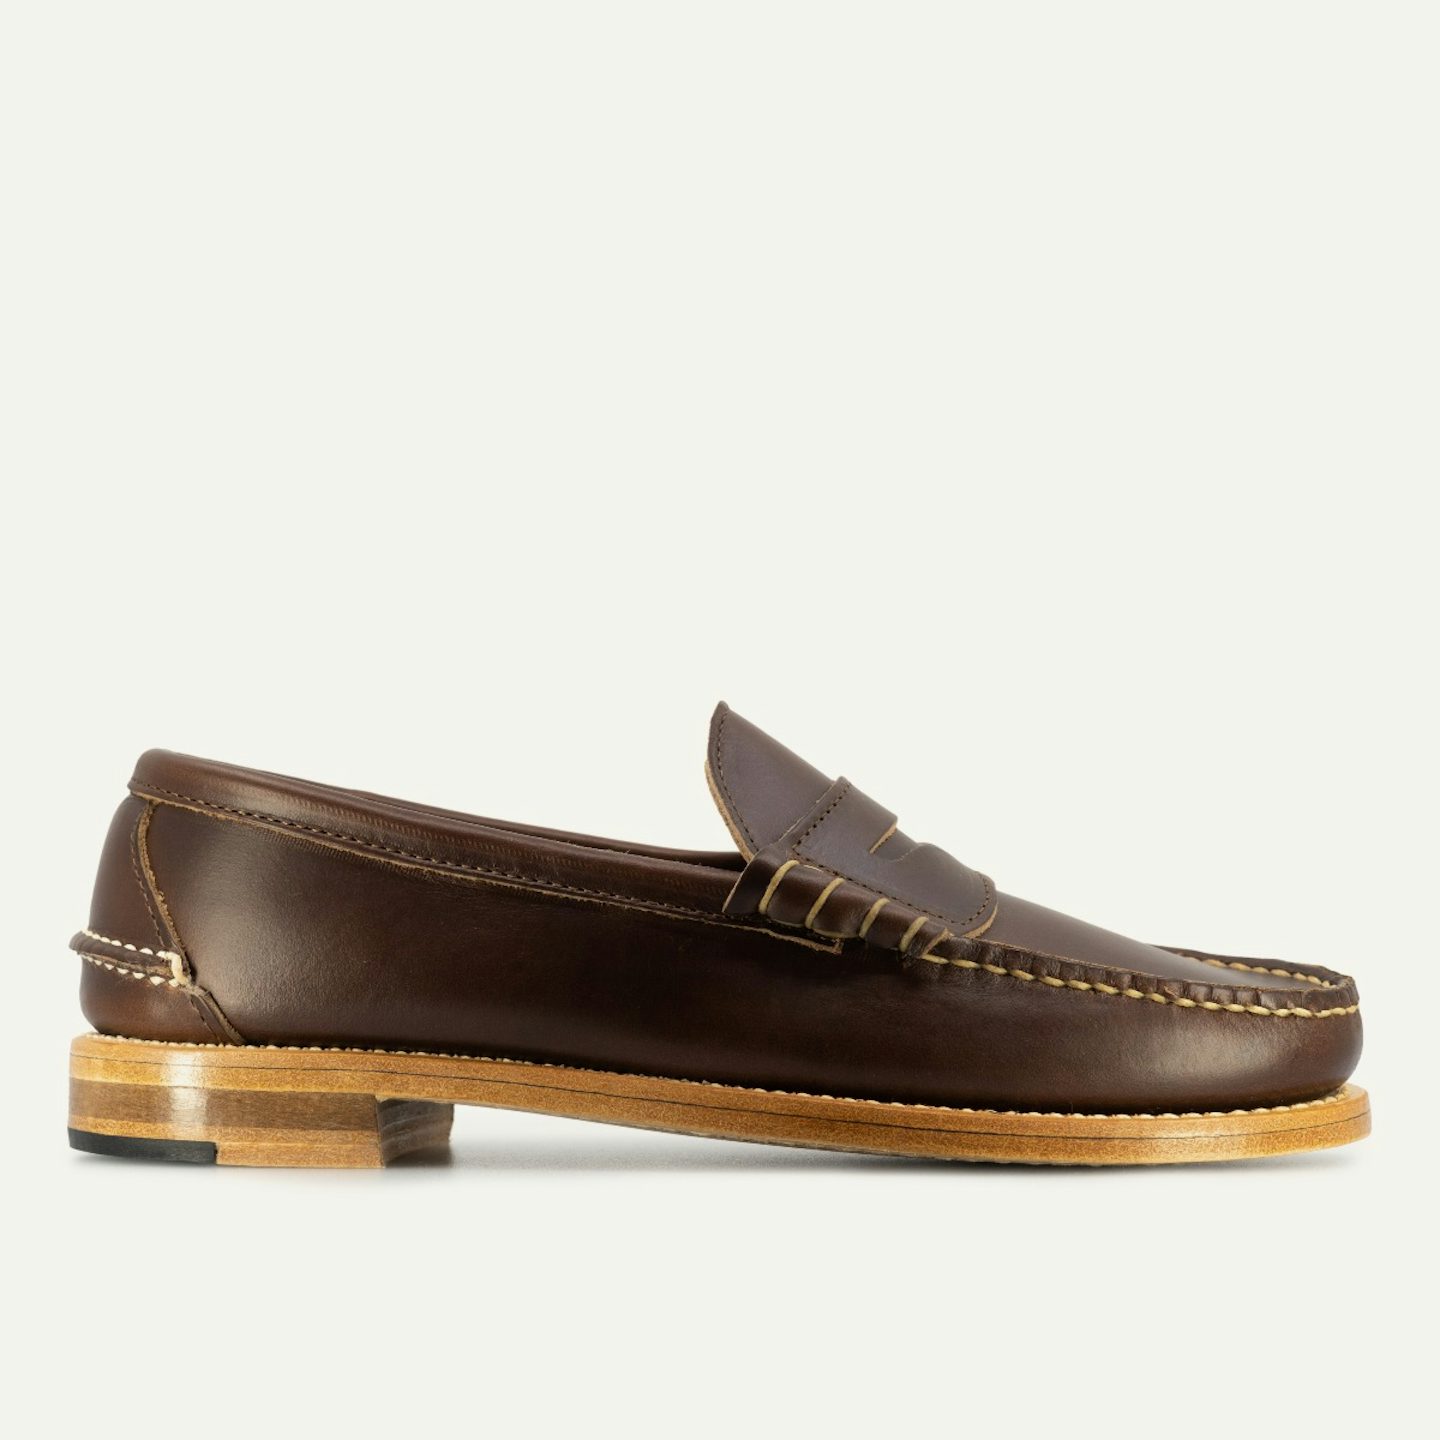 Penny Loafer - Chromexcel, Leather Sole with Dovetail Toplift - USA | Oak Street Bootmakers